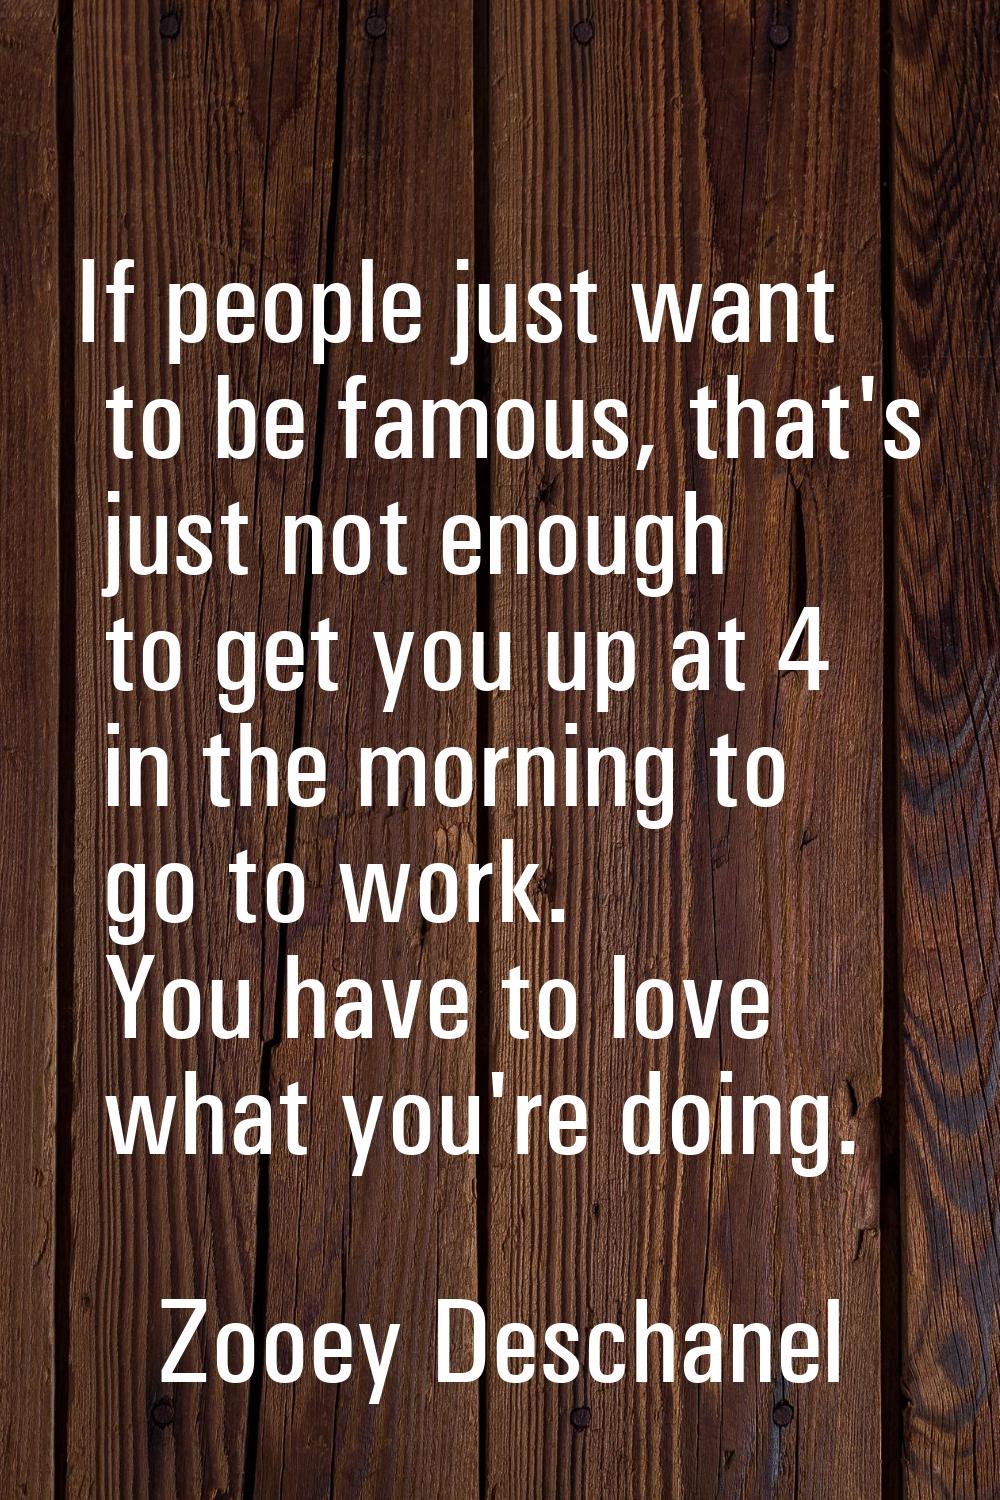 If people just want to be famous, that's just not enough to get you up at 4 in the morning to go to